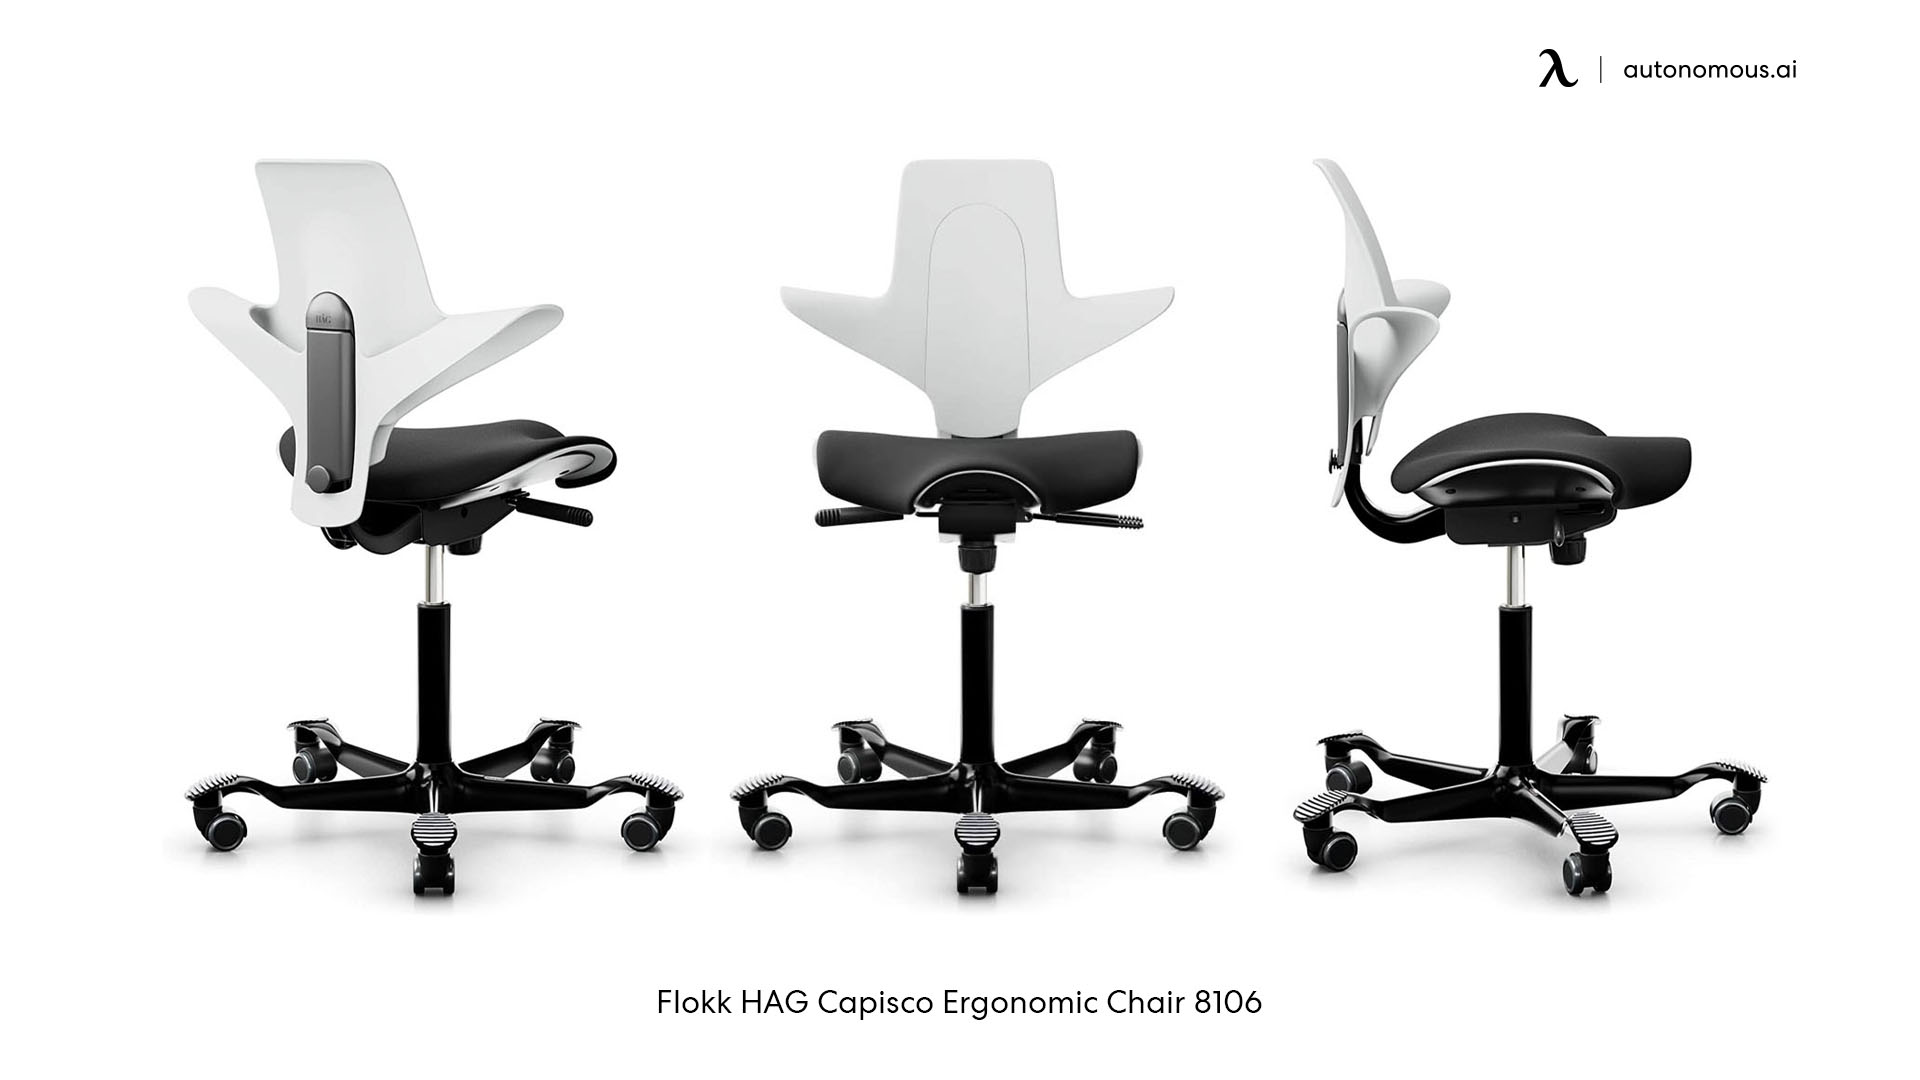 Ergonomic Office Chair with Saddle Seat by Capisco